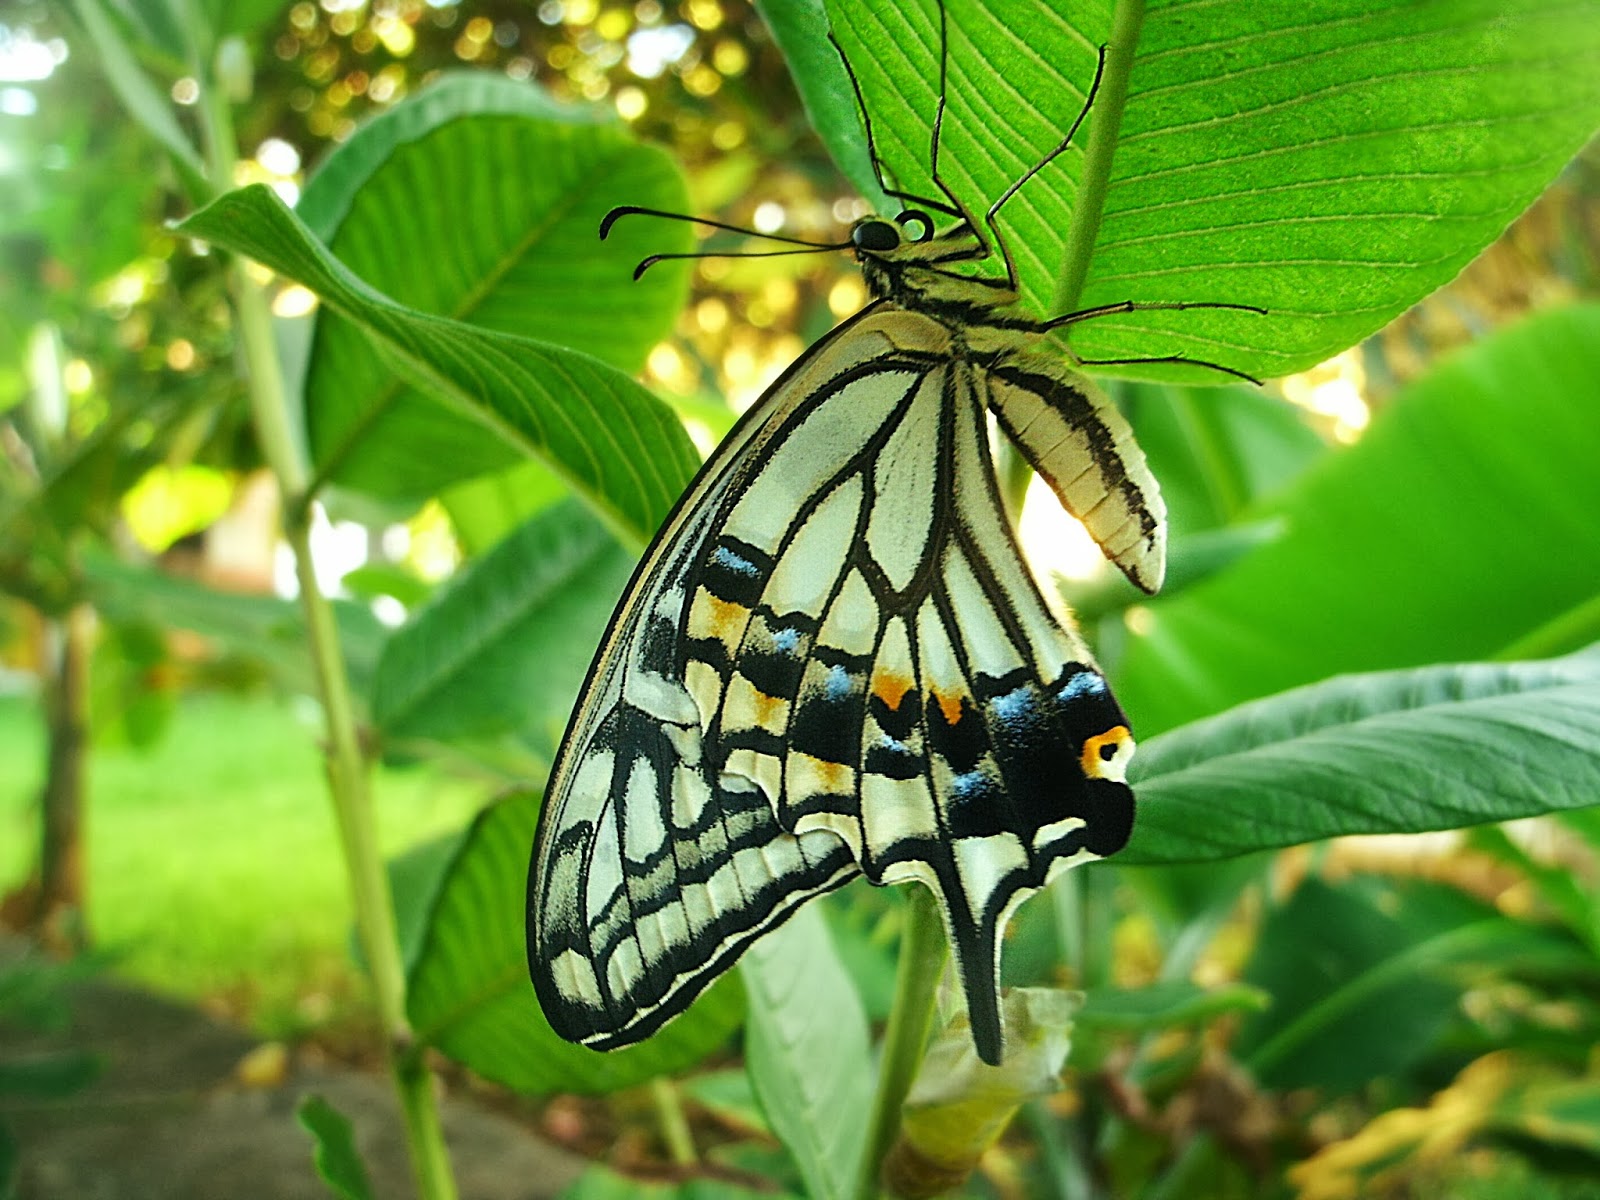 How do butterflies protect themselves?